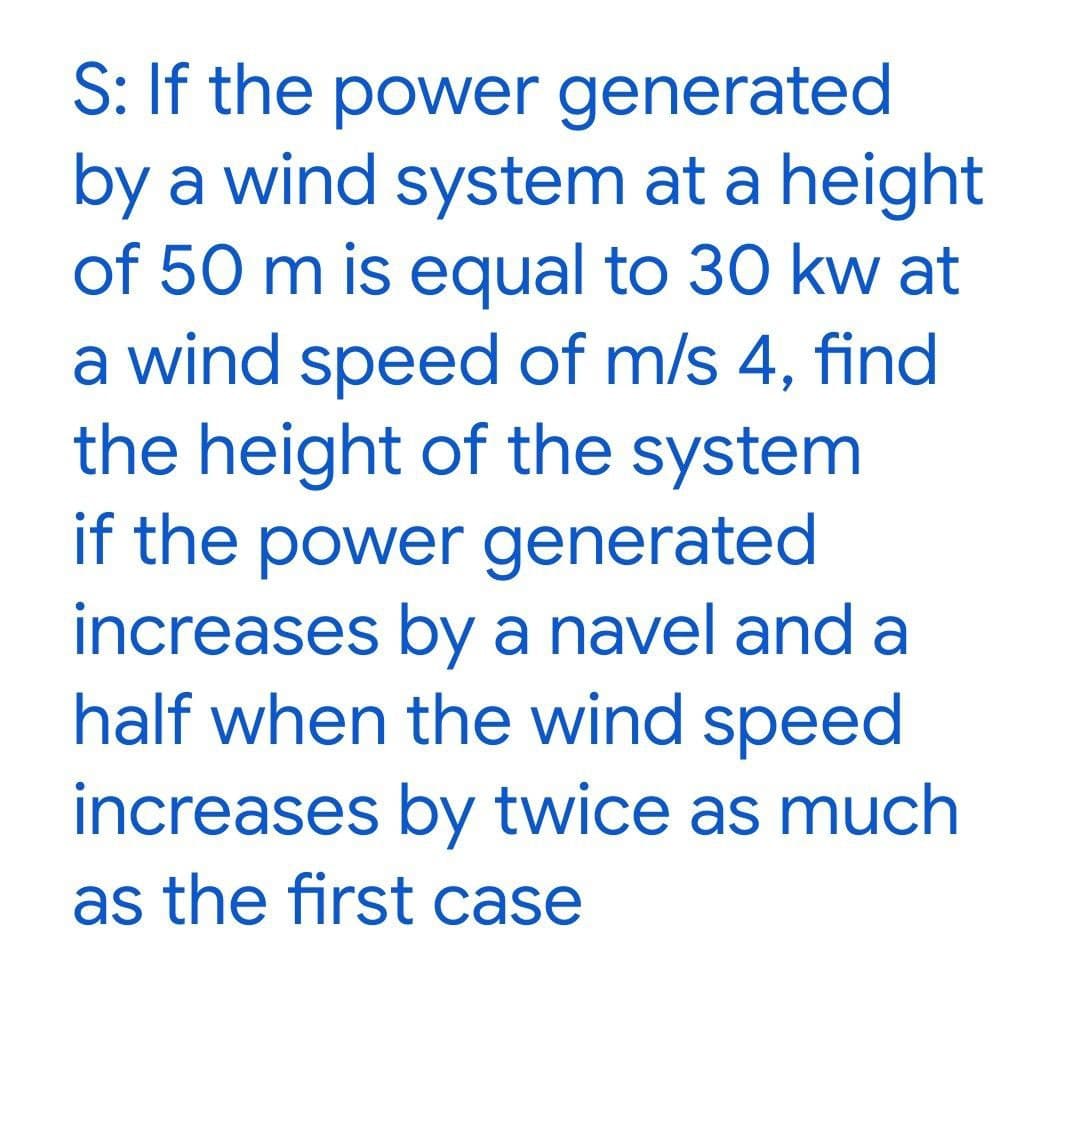 S: If the power generated
by a wind system at a height
of 50 m is equal to 30 kw at
a wind speed of m/s 4, find
the height of the system
if the power generated
increases by a navel and a
half when the wind speed
increases by twice as much
as the first case
